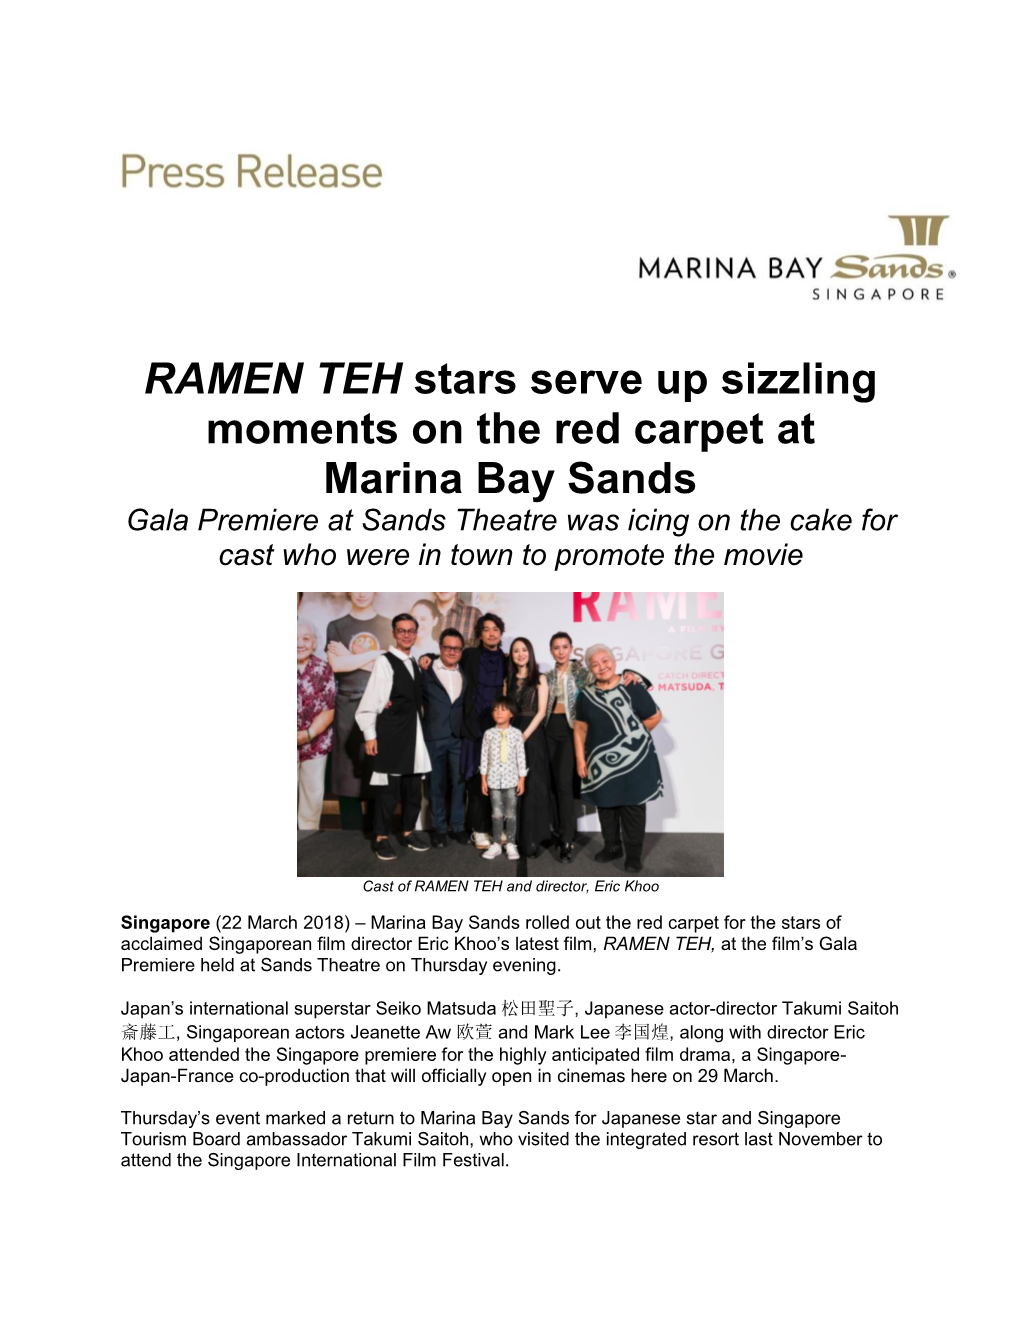 RAMEN TEH Stars Serve up Sizzling Moments on the Red Carpet At